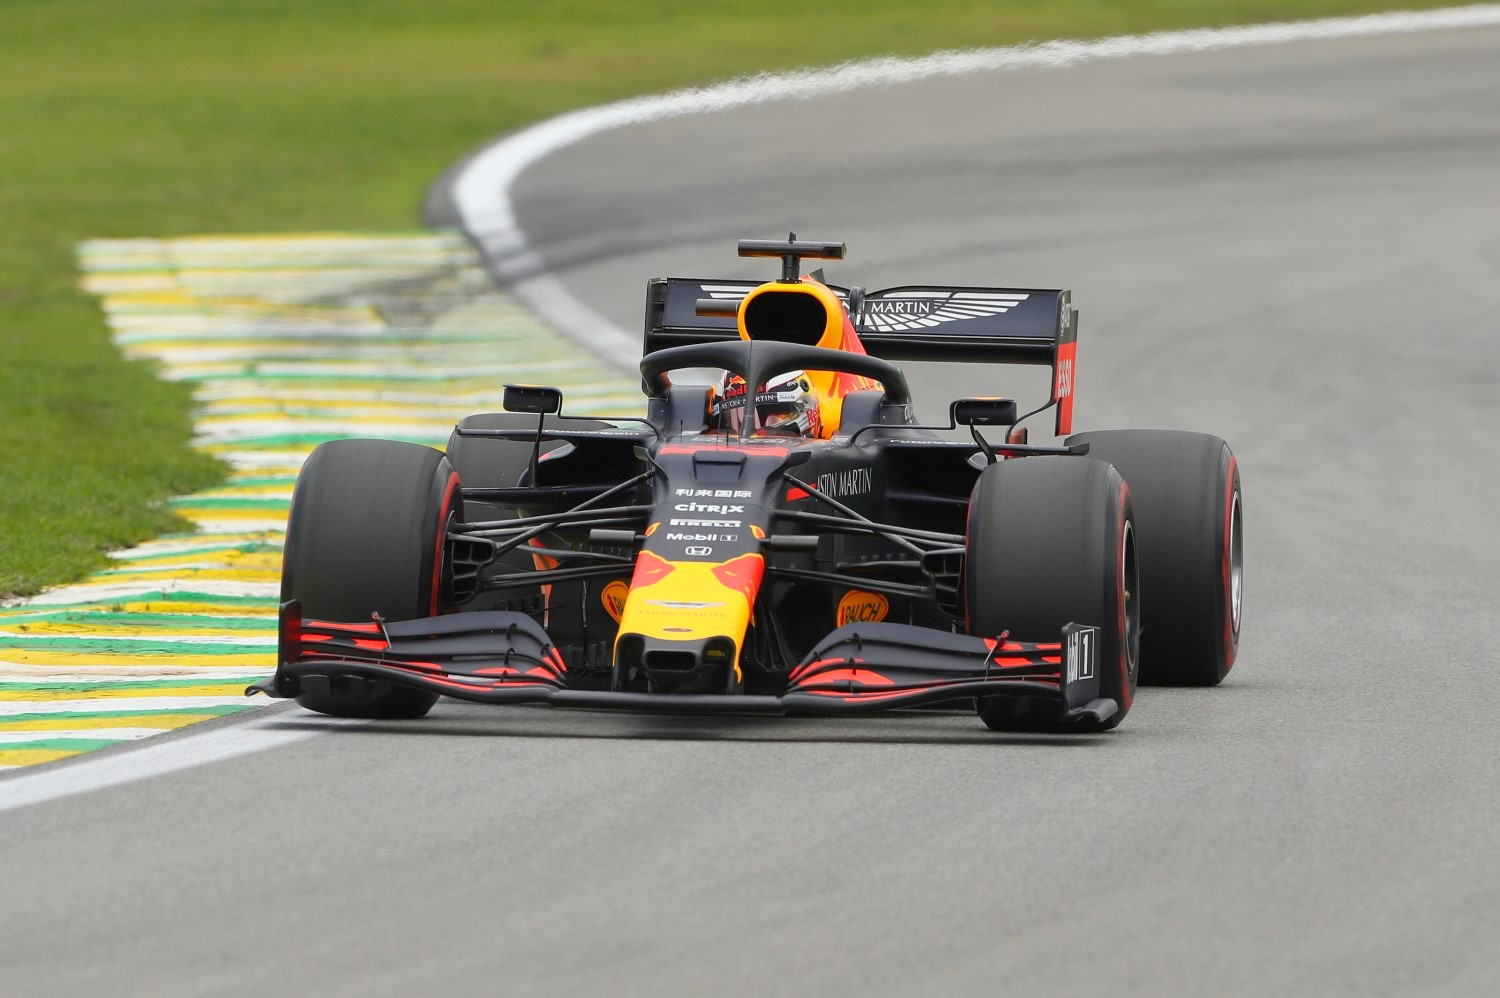 Max Verstappen wins his 2nd ever F1 pole